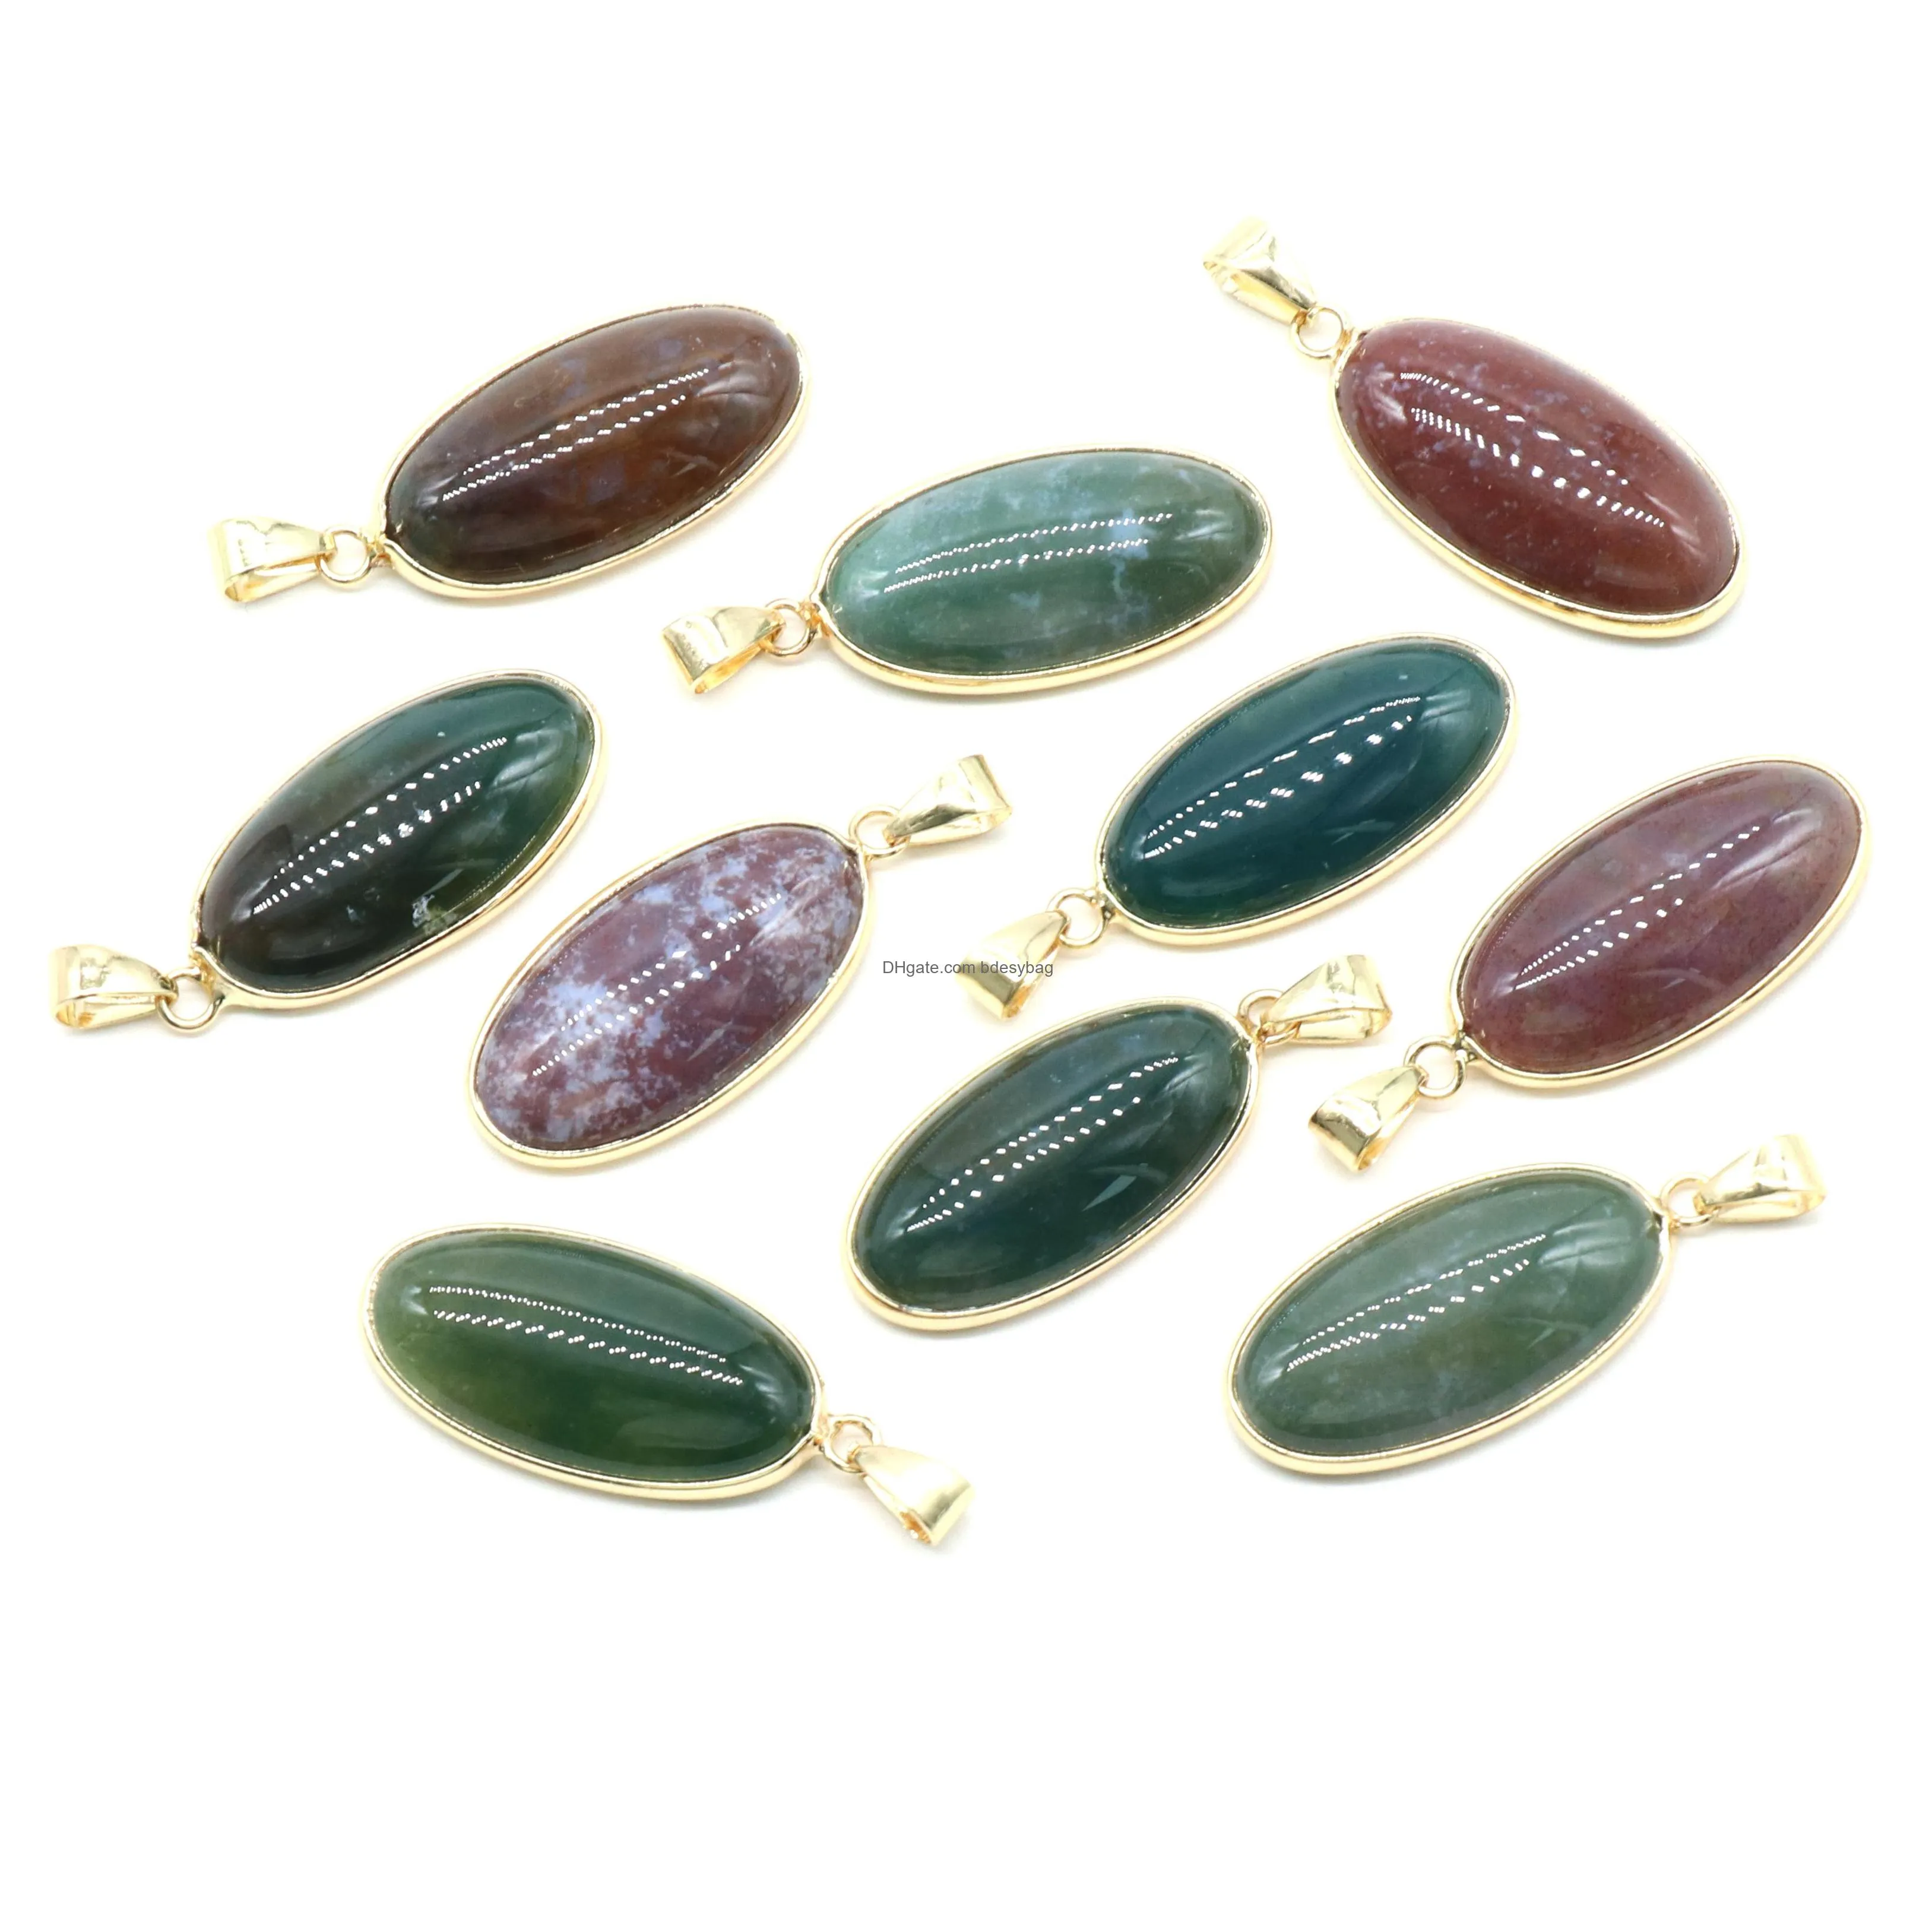 natural stone pendants waterdrop shape mixed stone agate green aventurine chakra healing stones charms for jewelry making necklace